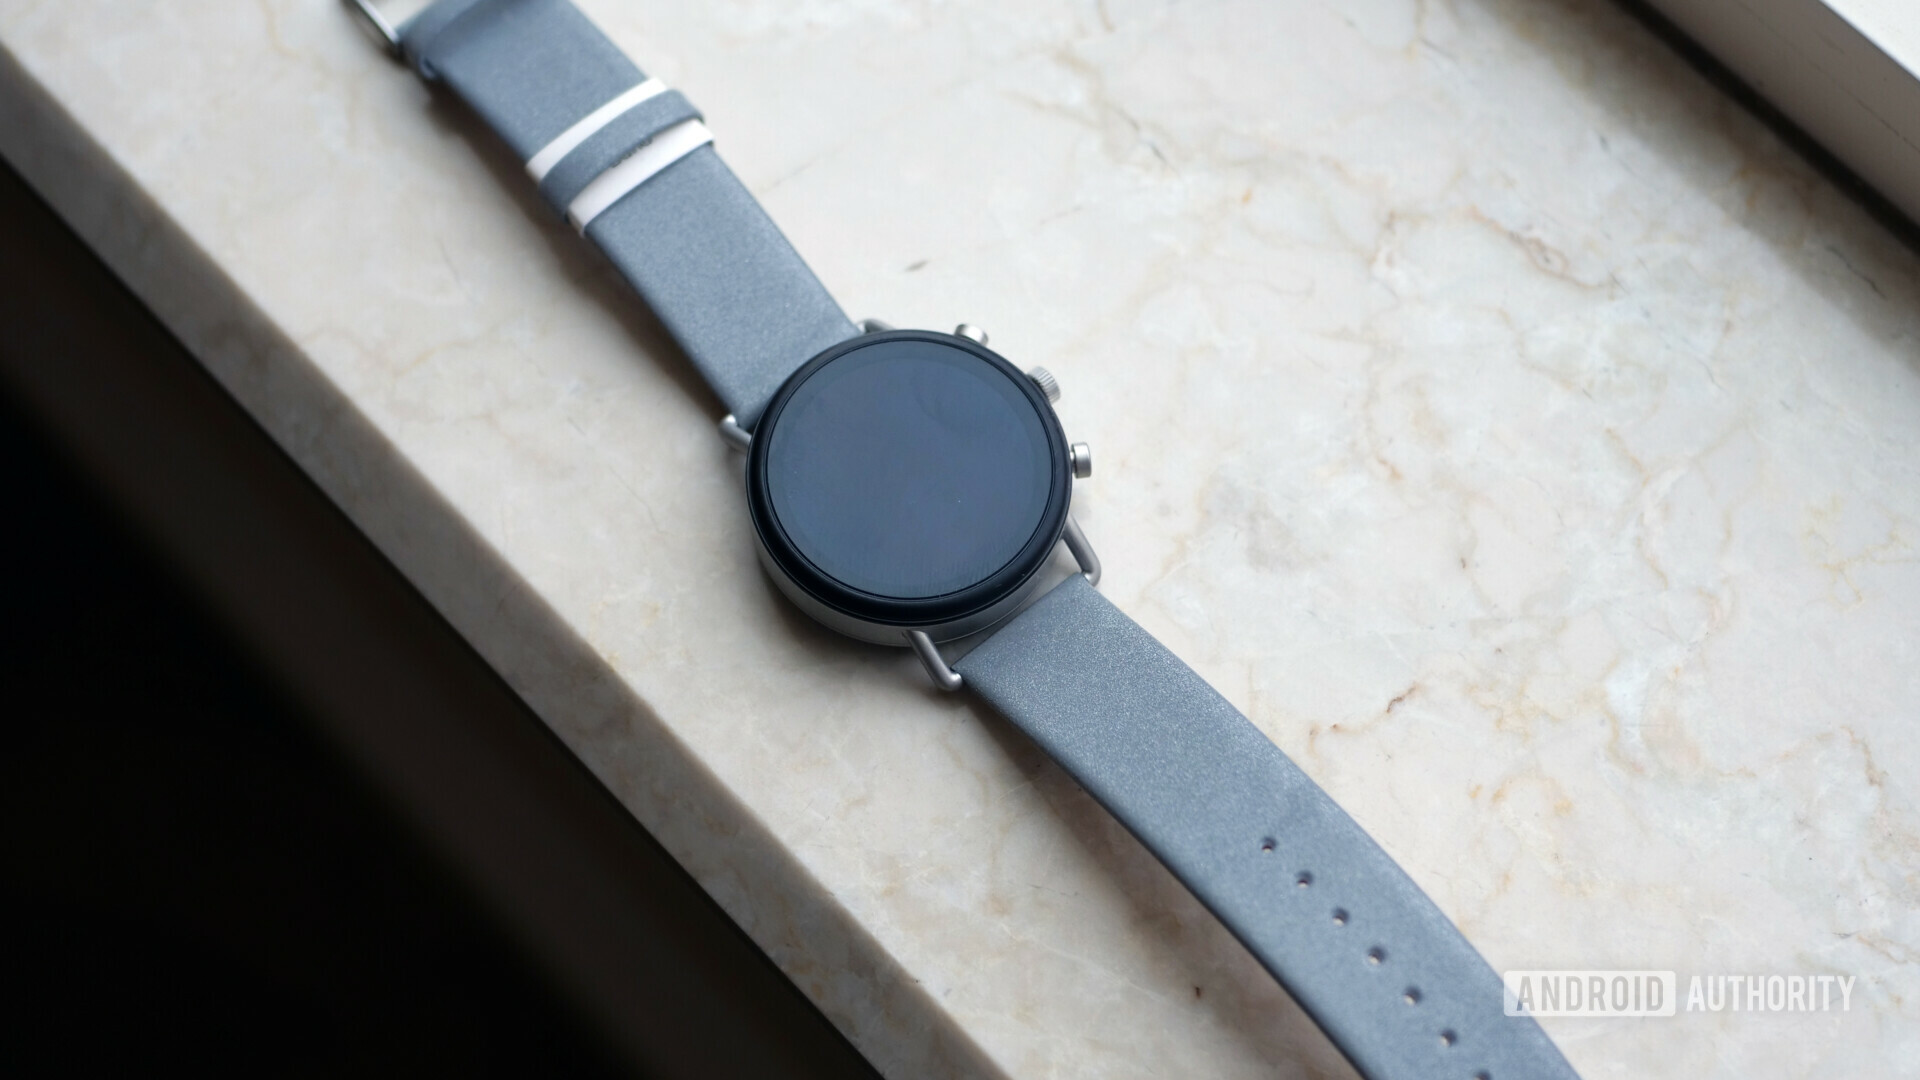 SKAGEN Falster 2 with reflective strap at CES 2019